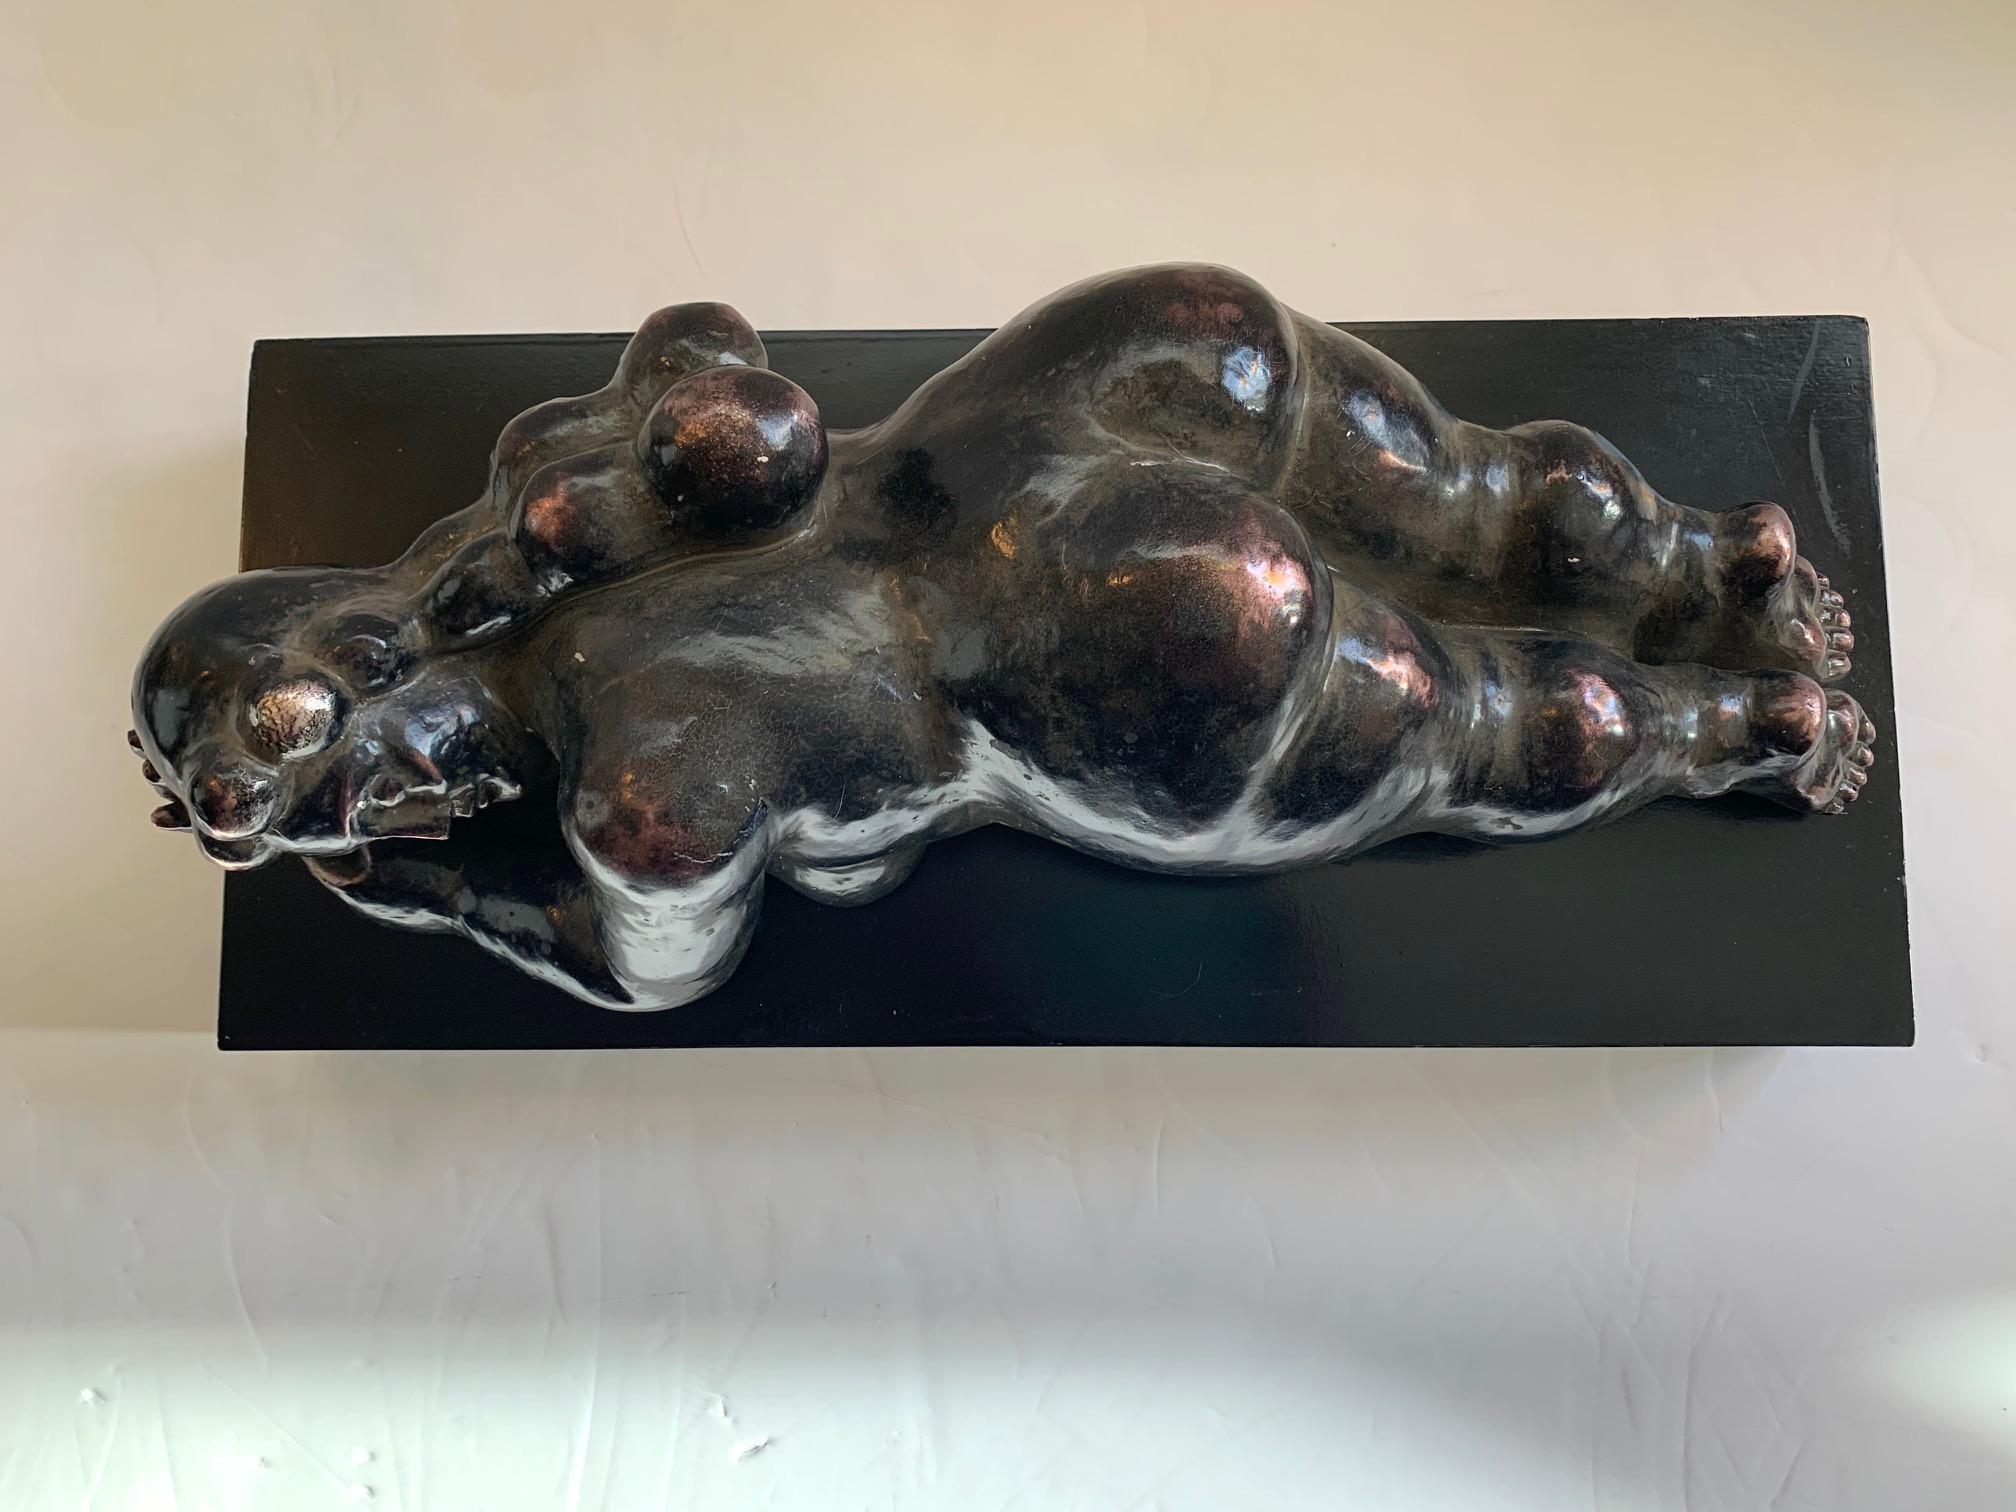 Sensual Reclining Nude Tabletop Sculpture in Style of Botero 5